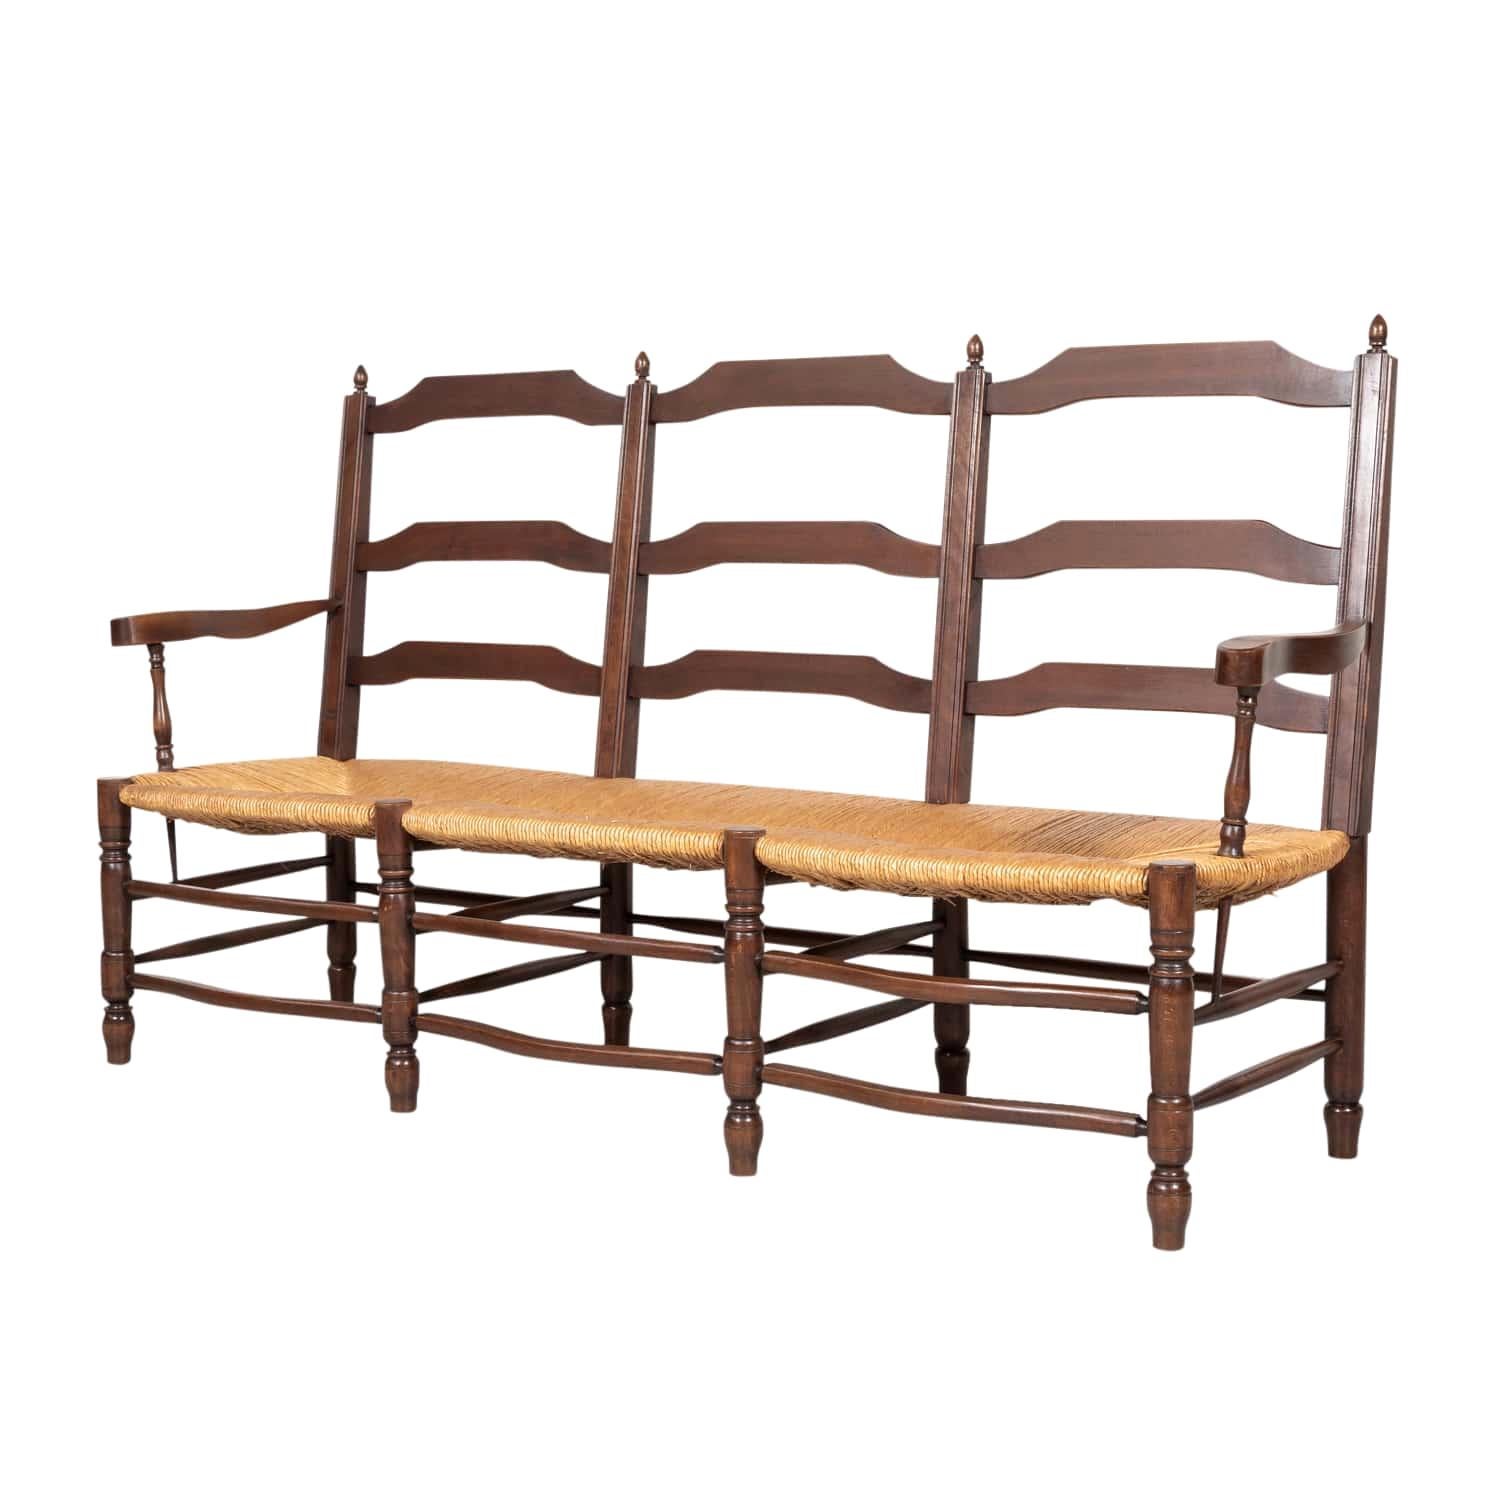 Country French Ladder-Back Walnut Settee or Radassier with Rush Seat